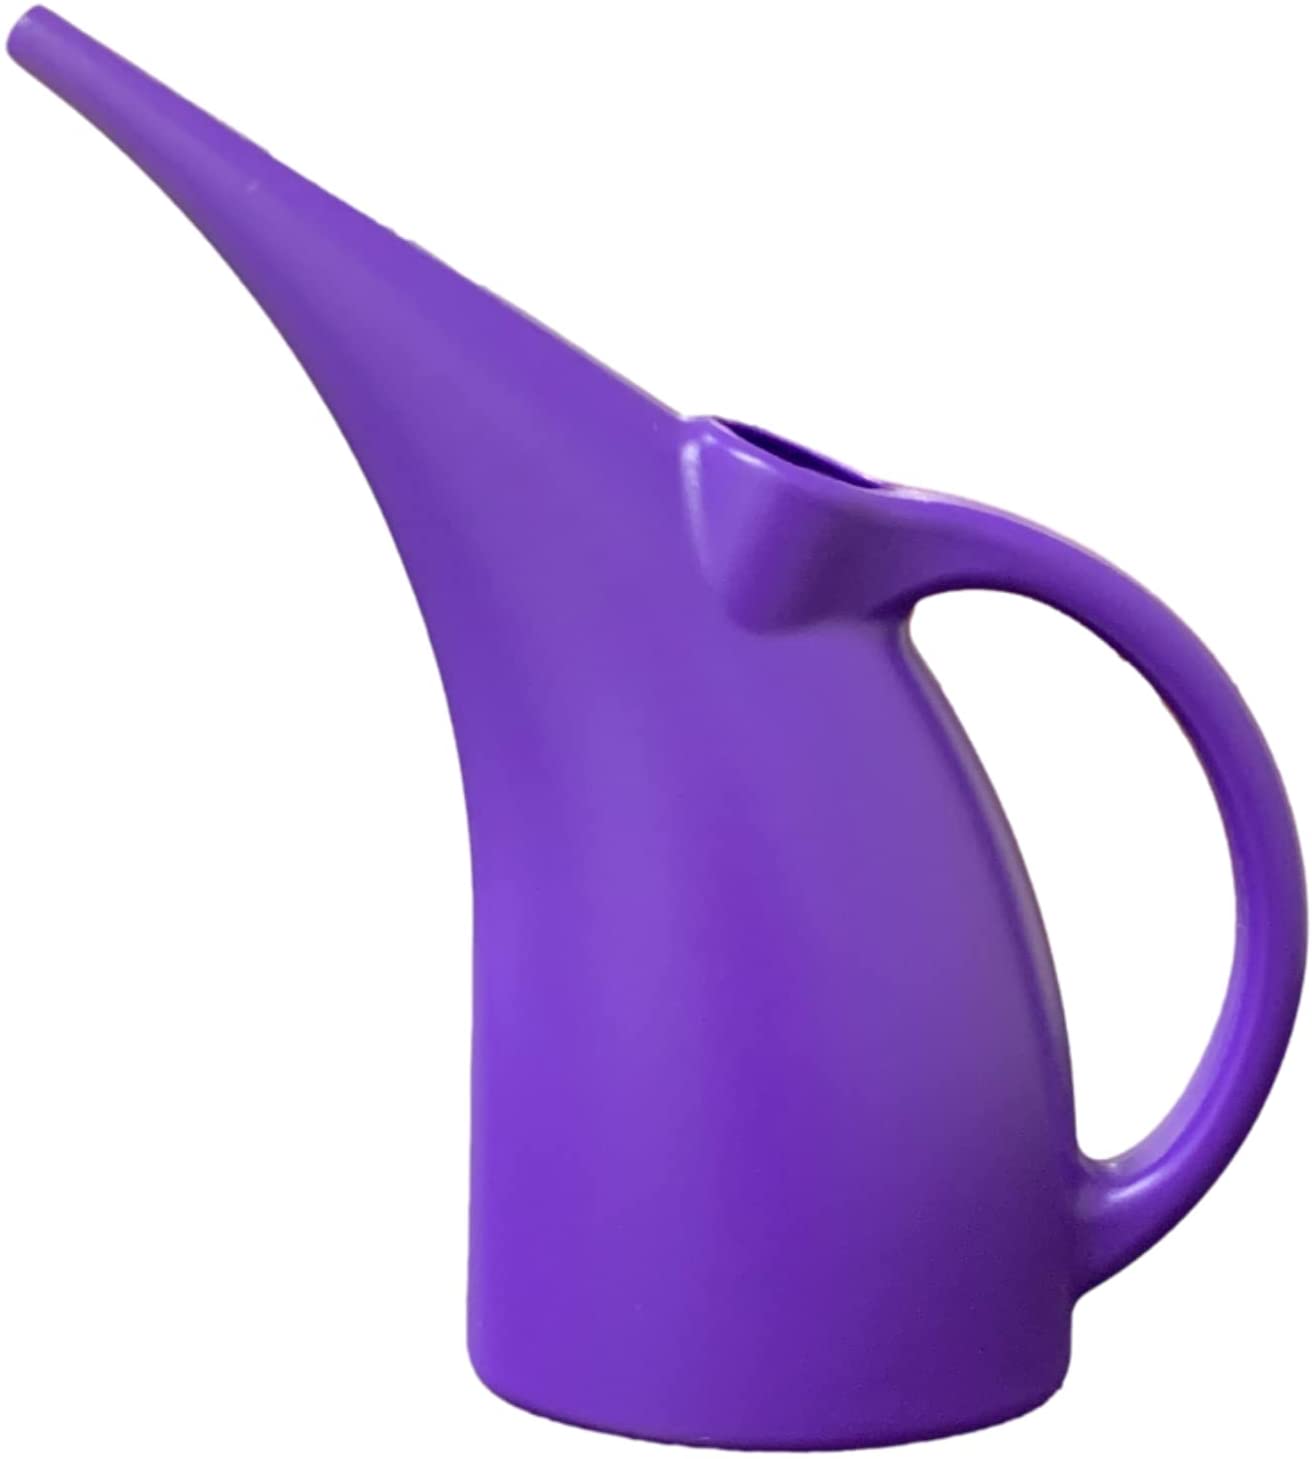 Kool Products (1 Pack) 1/2 Gallon Plant Watering Can Indoor Watering Pot for House Plants - BPA Free (Purple) 12.99 freeshipping - Kool Products